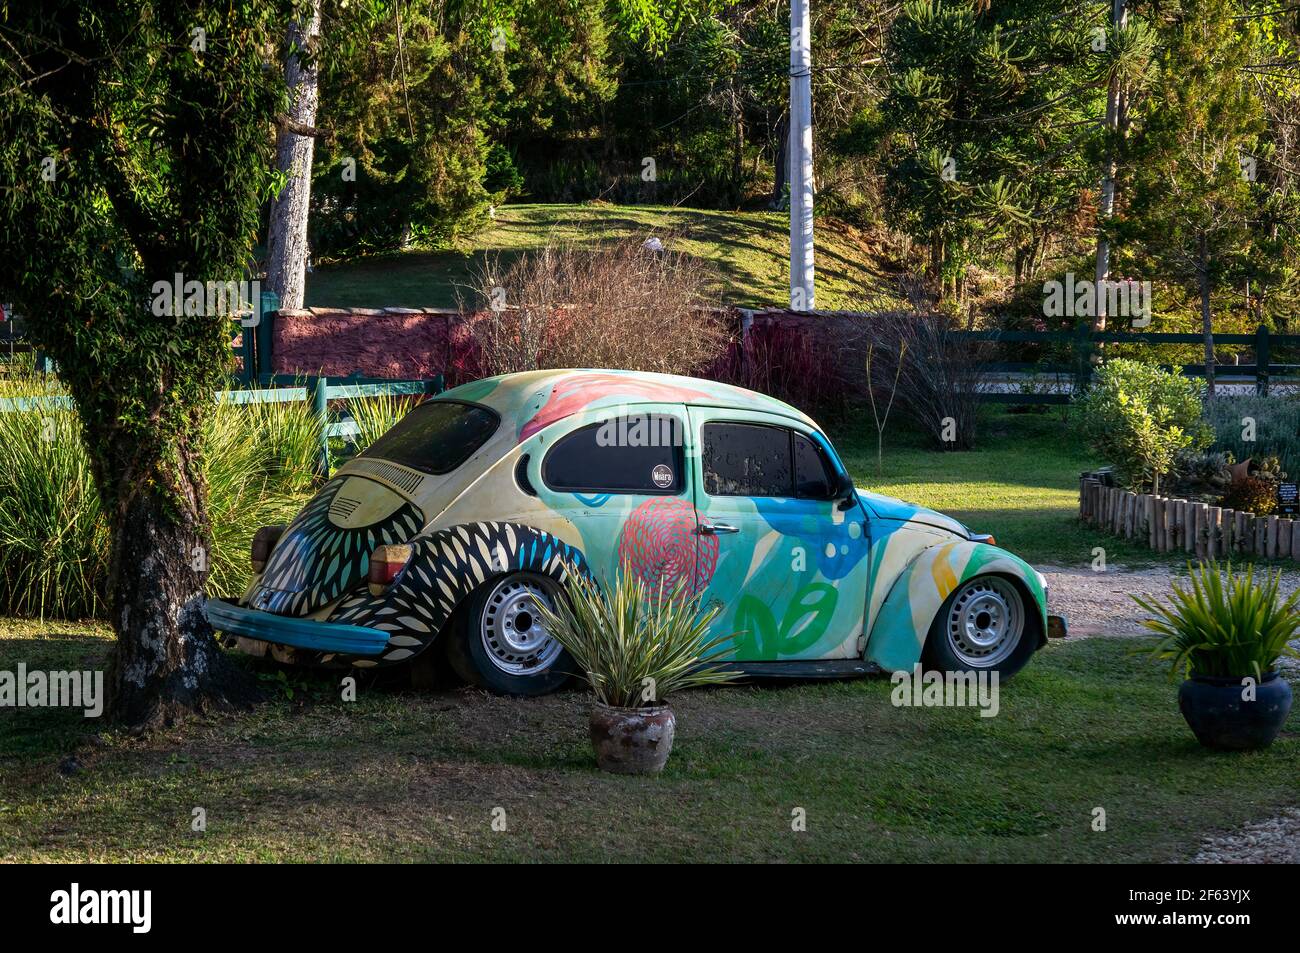 A decorated Volkswagen Beetle used as garden ornament at the front parking lot of Moara Cafe, a known coffee shop located at Salvador Pacetti road. Stock Photo